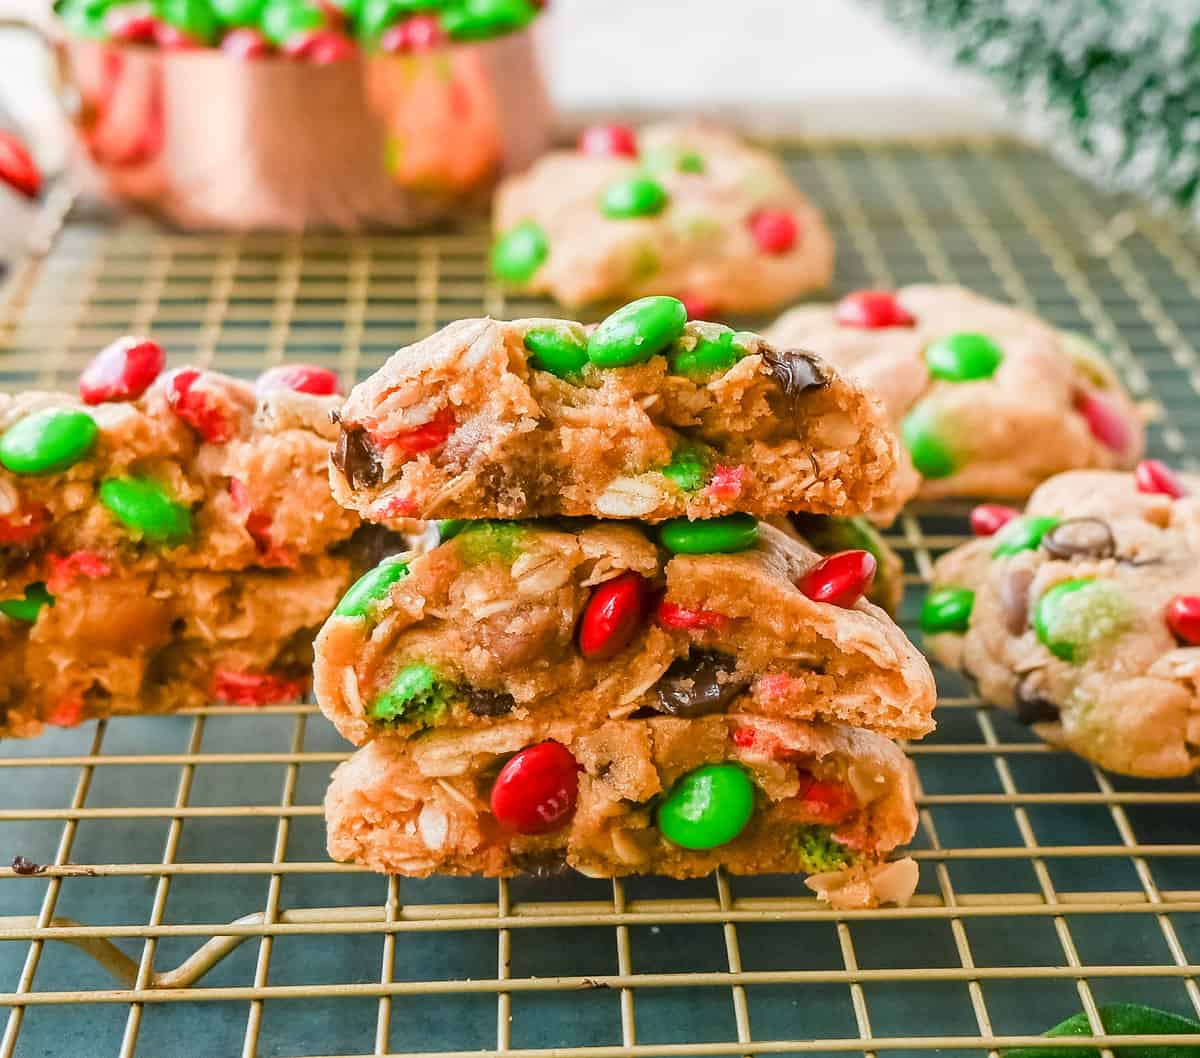 Christmas Monster Cookies. These popular, soft, thick, and chewy Christmas Monster Cookies are made with oats, peanut butter, chocolate chips, and holiday red and green M & M's. They are an easy Christmas cookie that can be made in minutes.